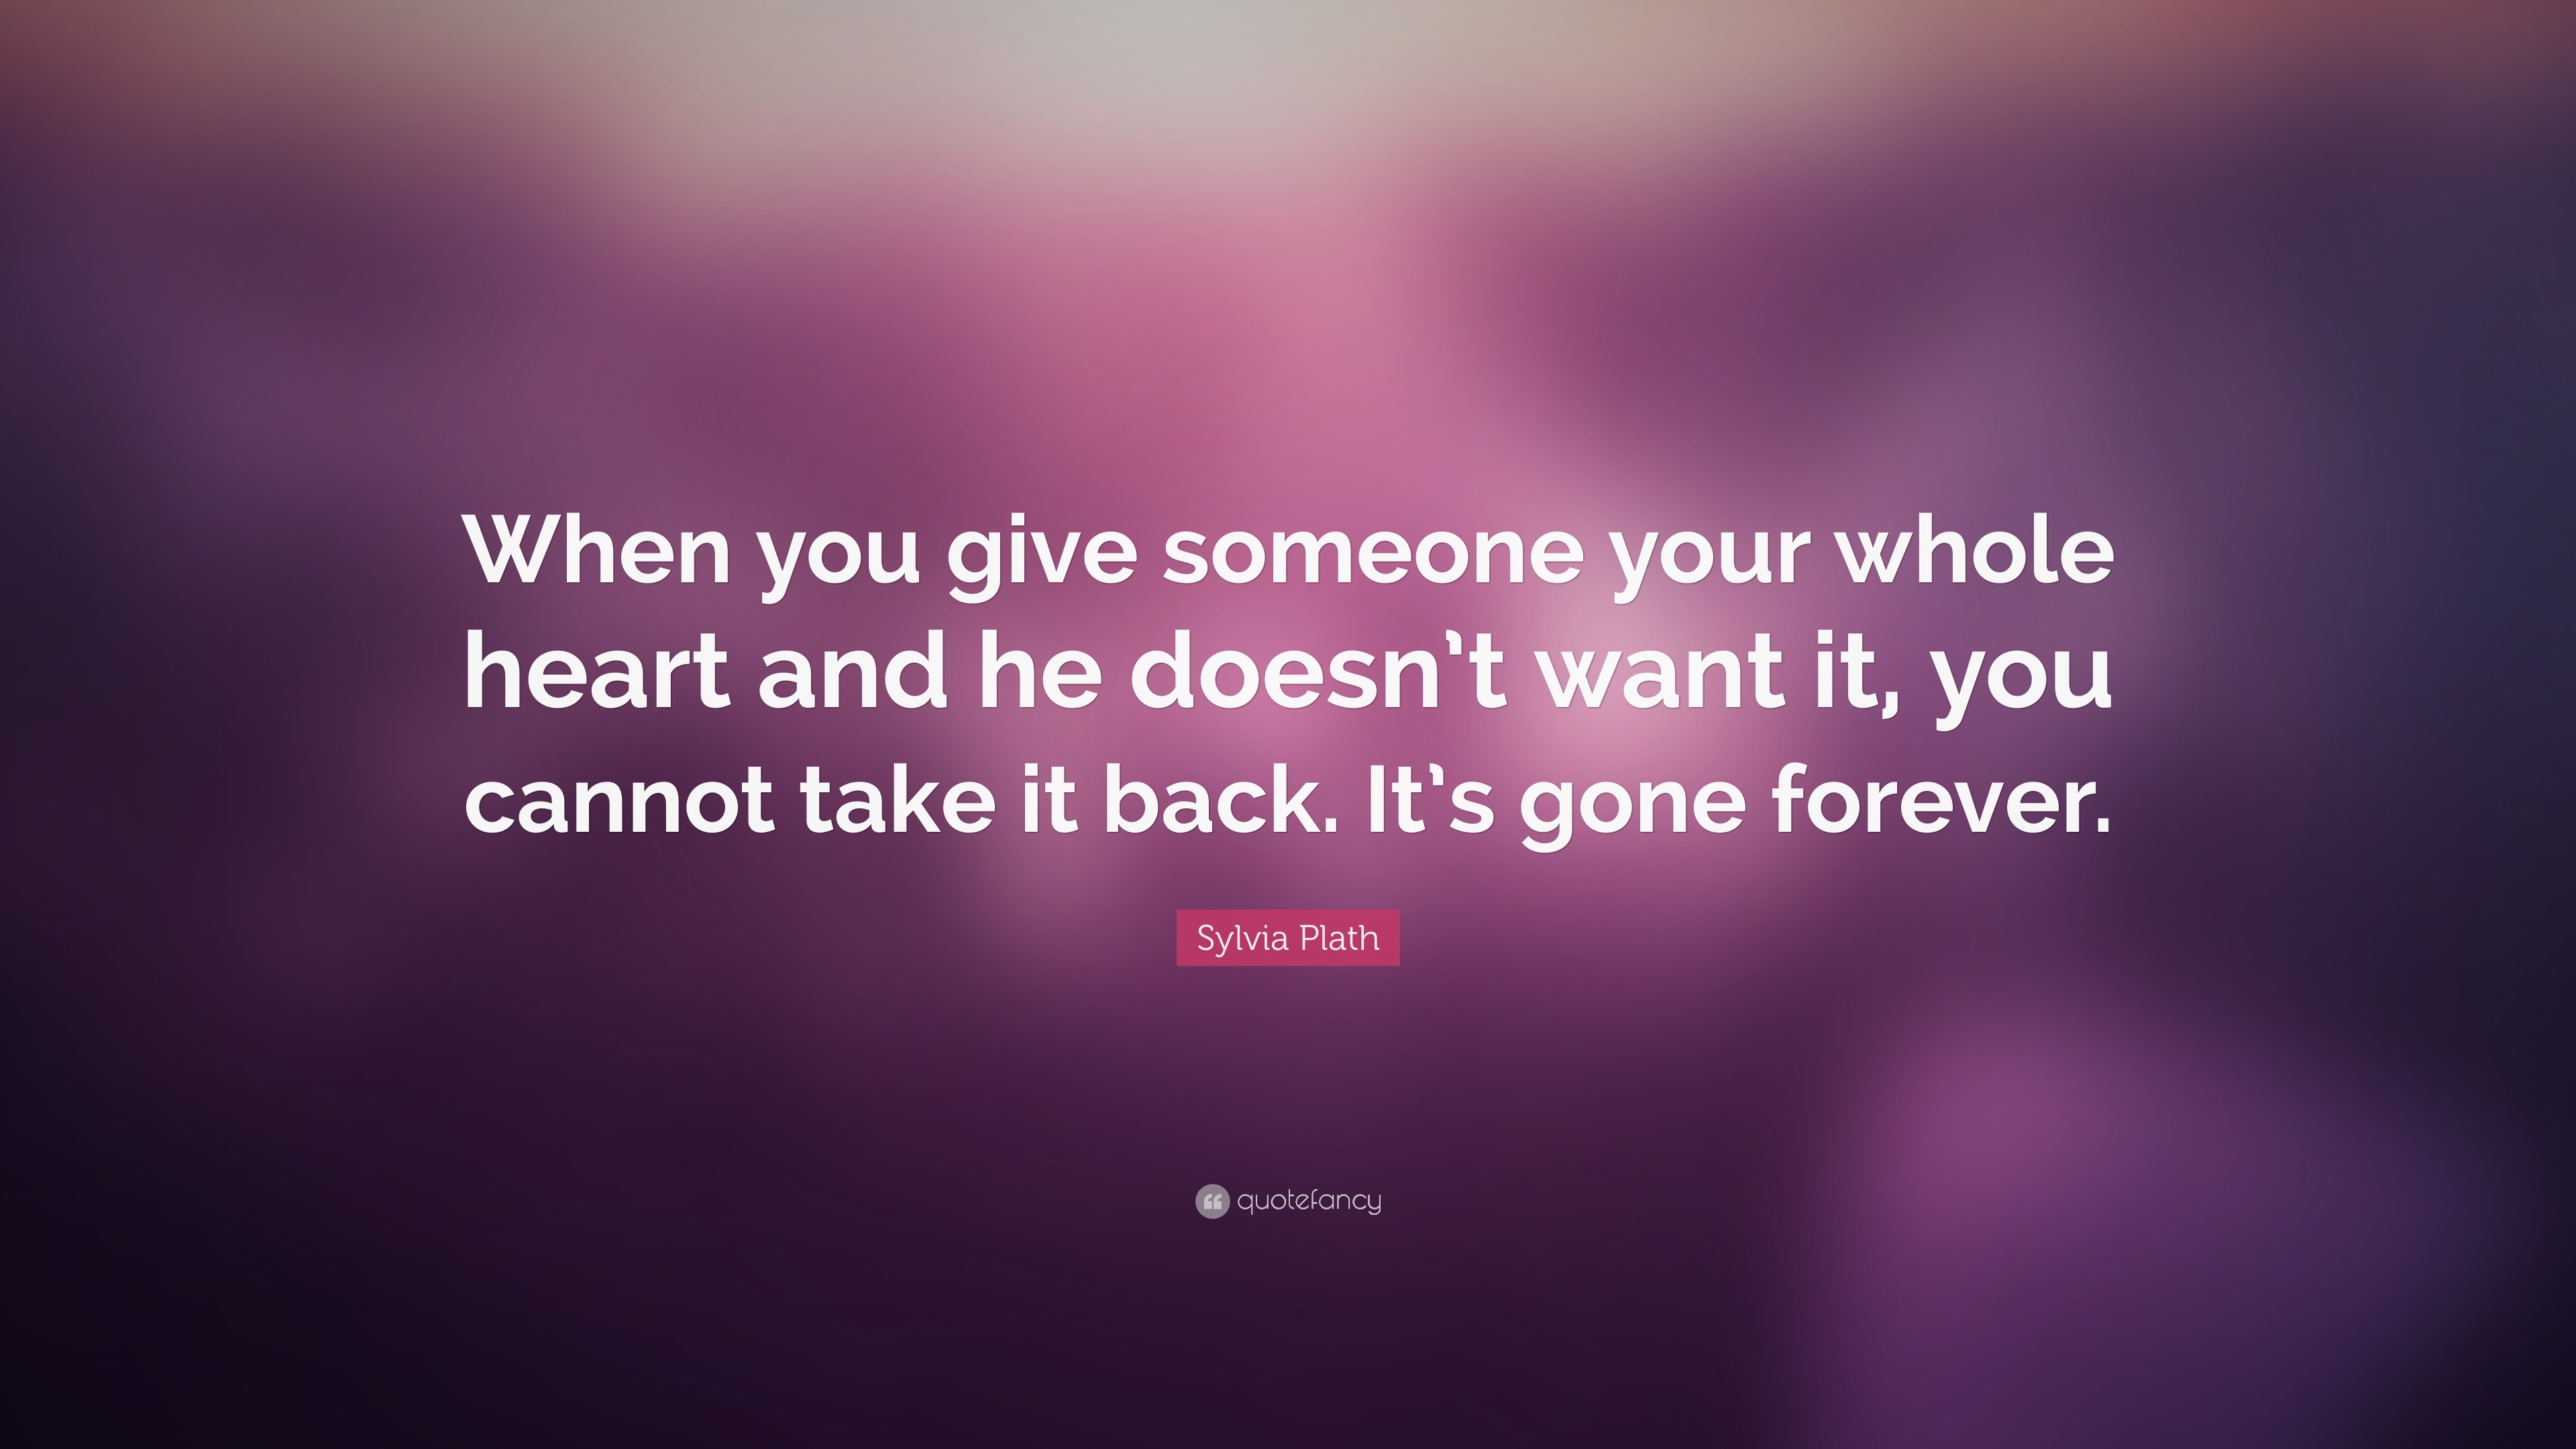 Sylvia Plath Quote: “When you give someone your whole heart and he ...